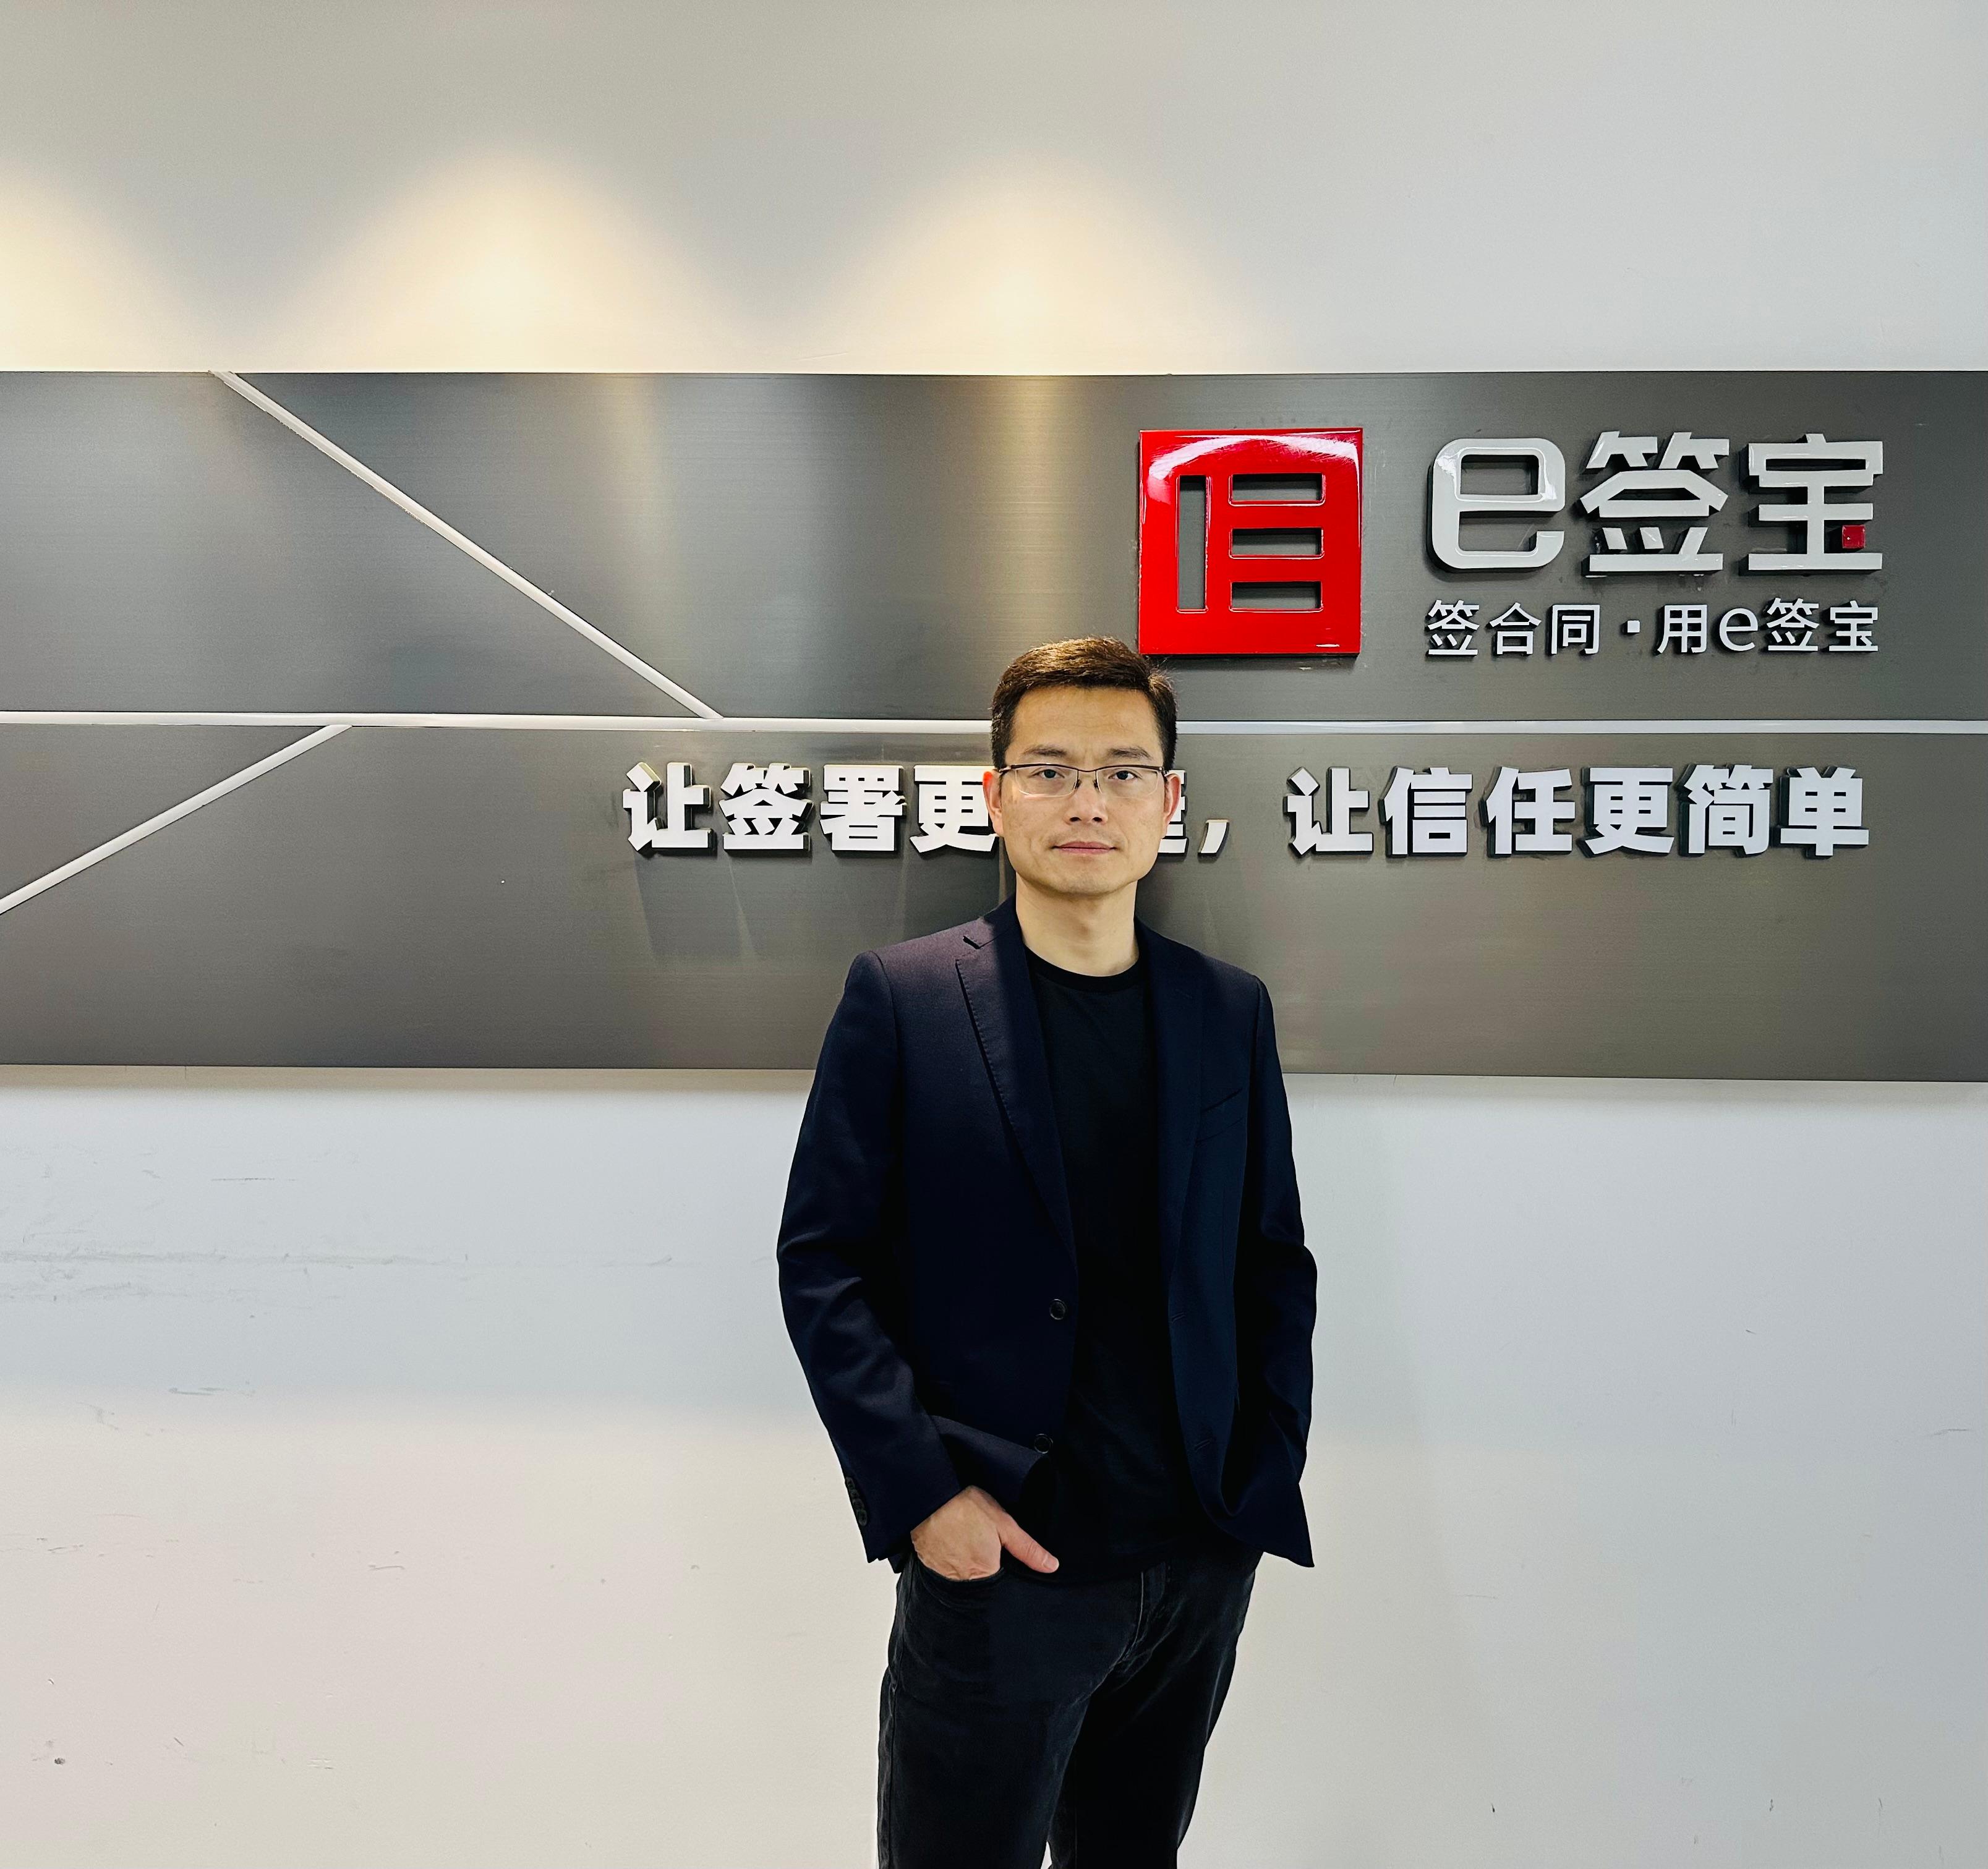 Invest Hong Kong announced today (April 2) that it has assisted a leading Mainland e-signature services provider, eSign, to build its international headquarters in Hong Kong as part of the company's global expansion strategy. Photo shows the Chairman of eSign, Mr Jin Hongzhou. 


